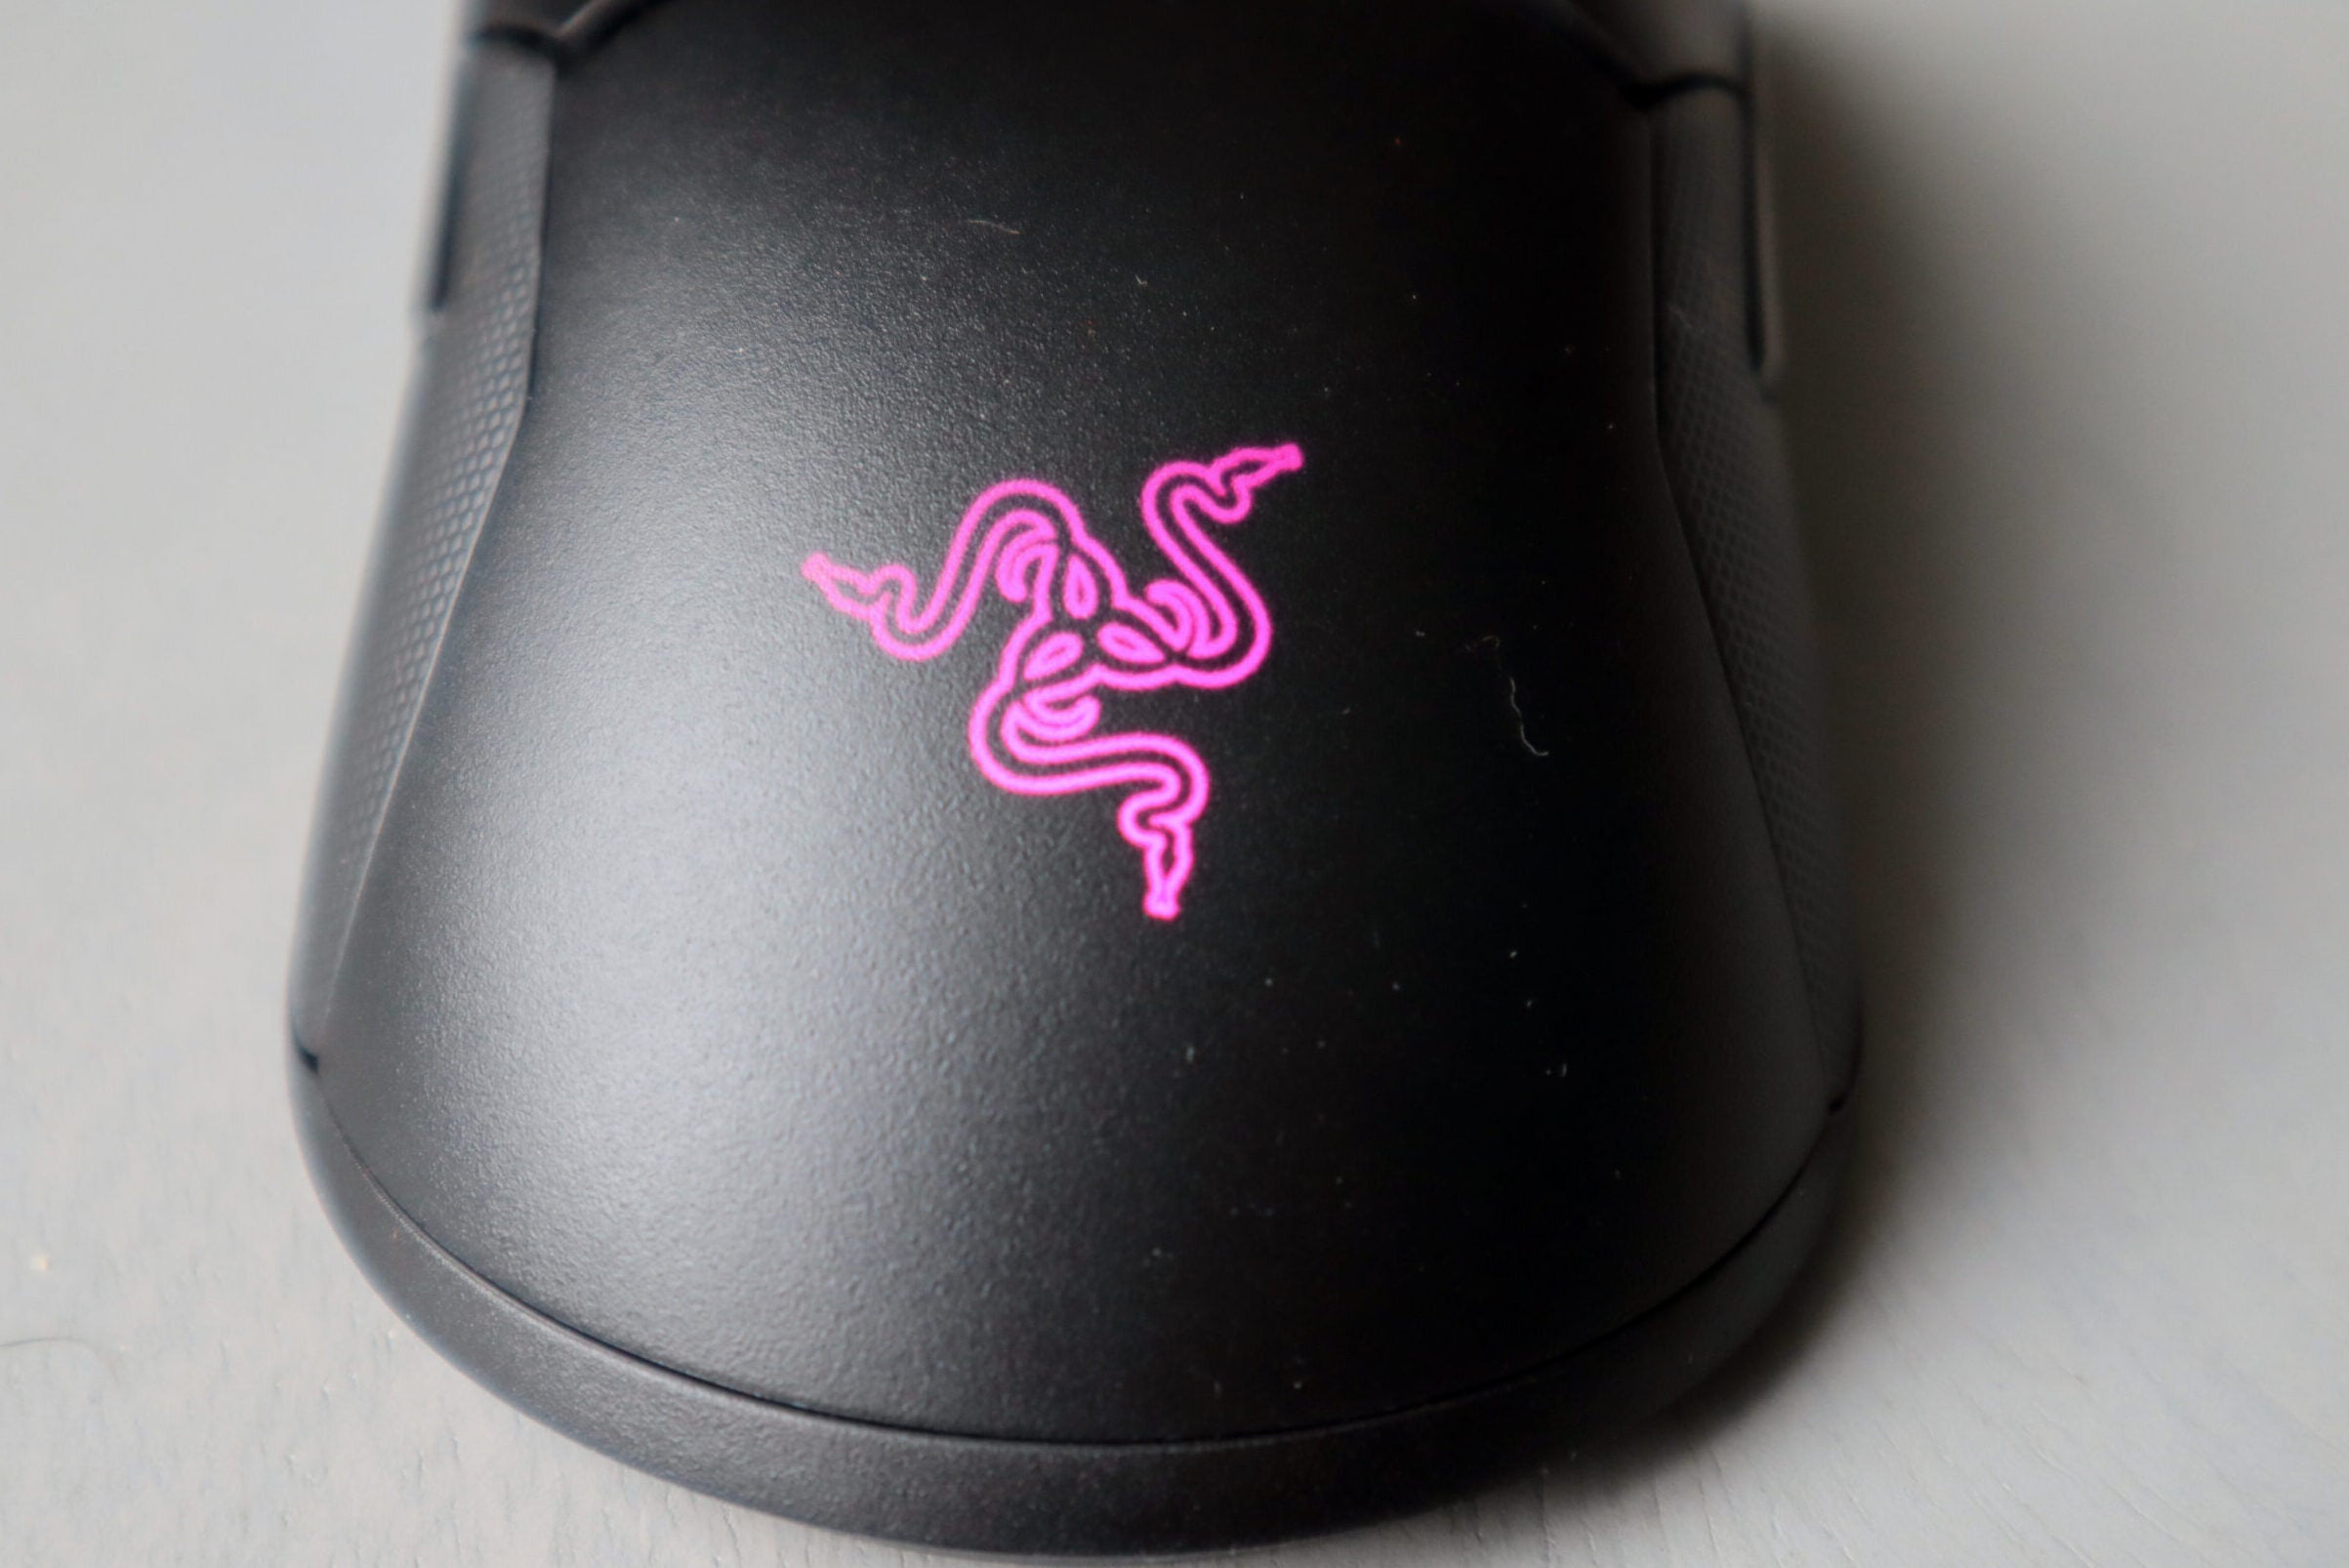 Razer Viper 8Kgaming wired mouse with beautifull logo on table